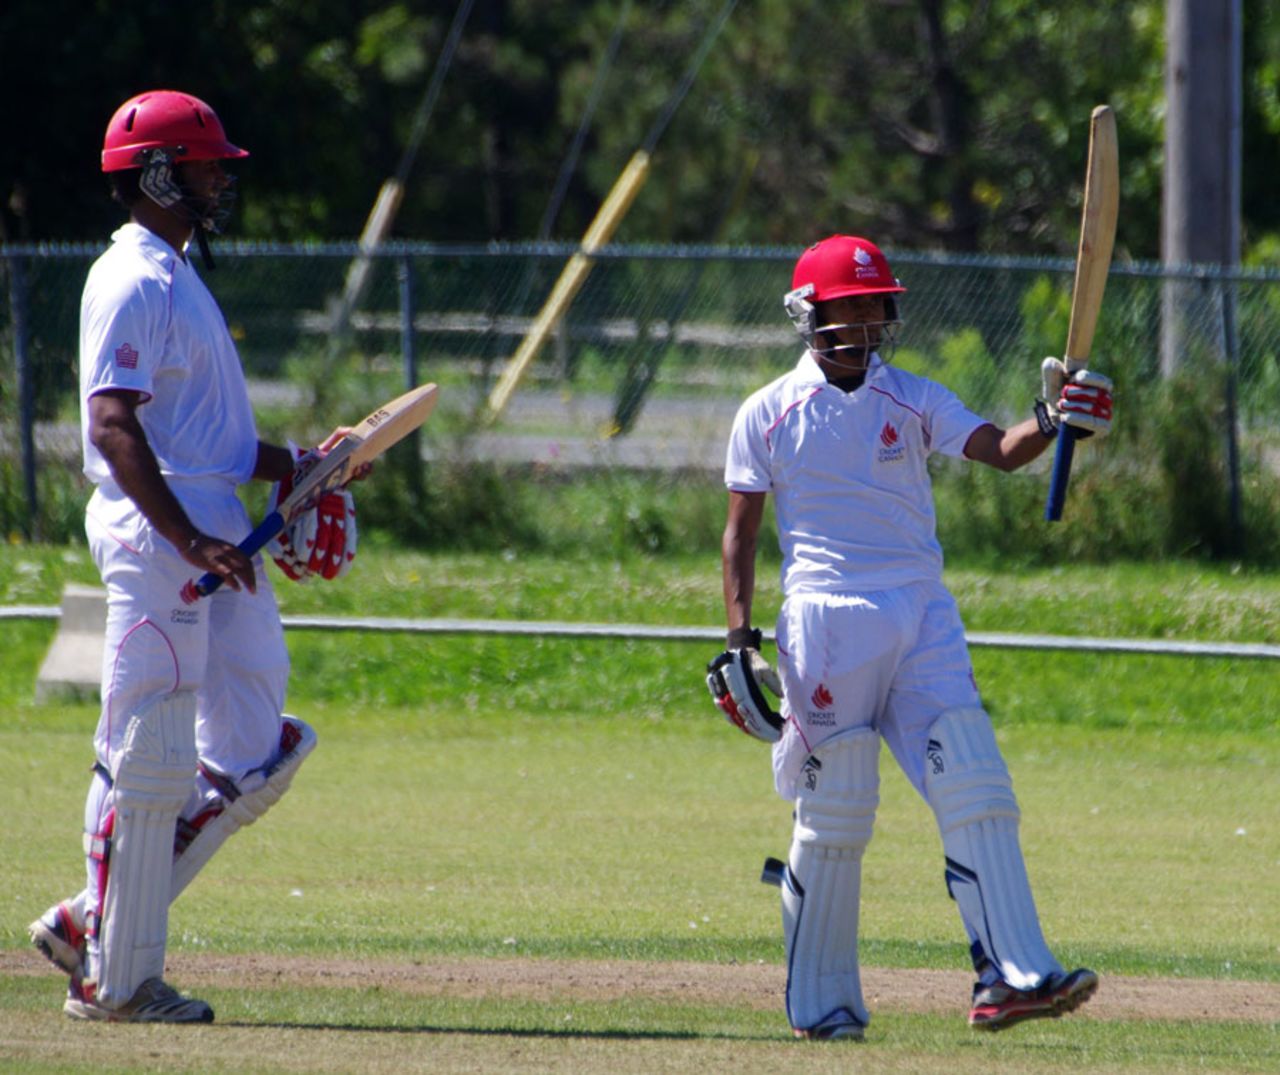 Salman Nazar raises his bat after scoring a half-century, Canada v Netherlands, ICC Intercontinental Cup, King City, 2nd day, August 23, 2013